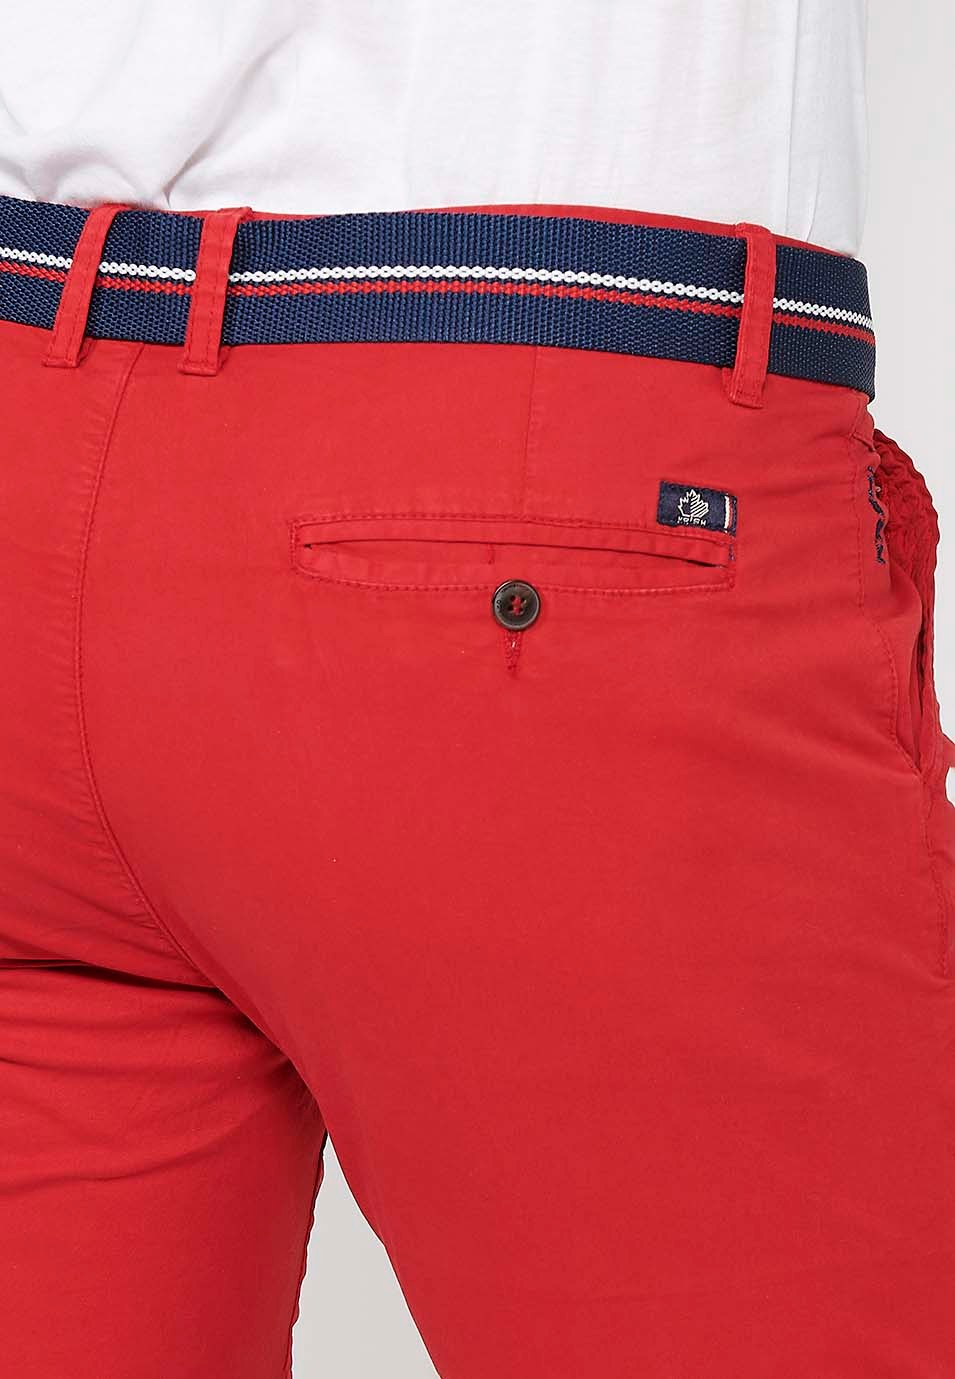 Shorts with cuffed finish with front closure with zipper and button and belt in Red for Men 7